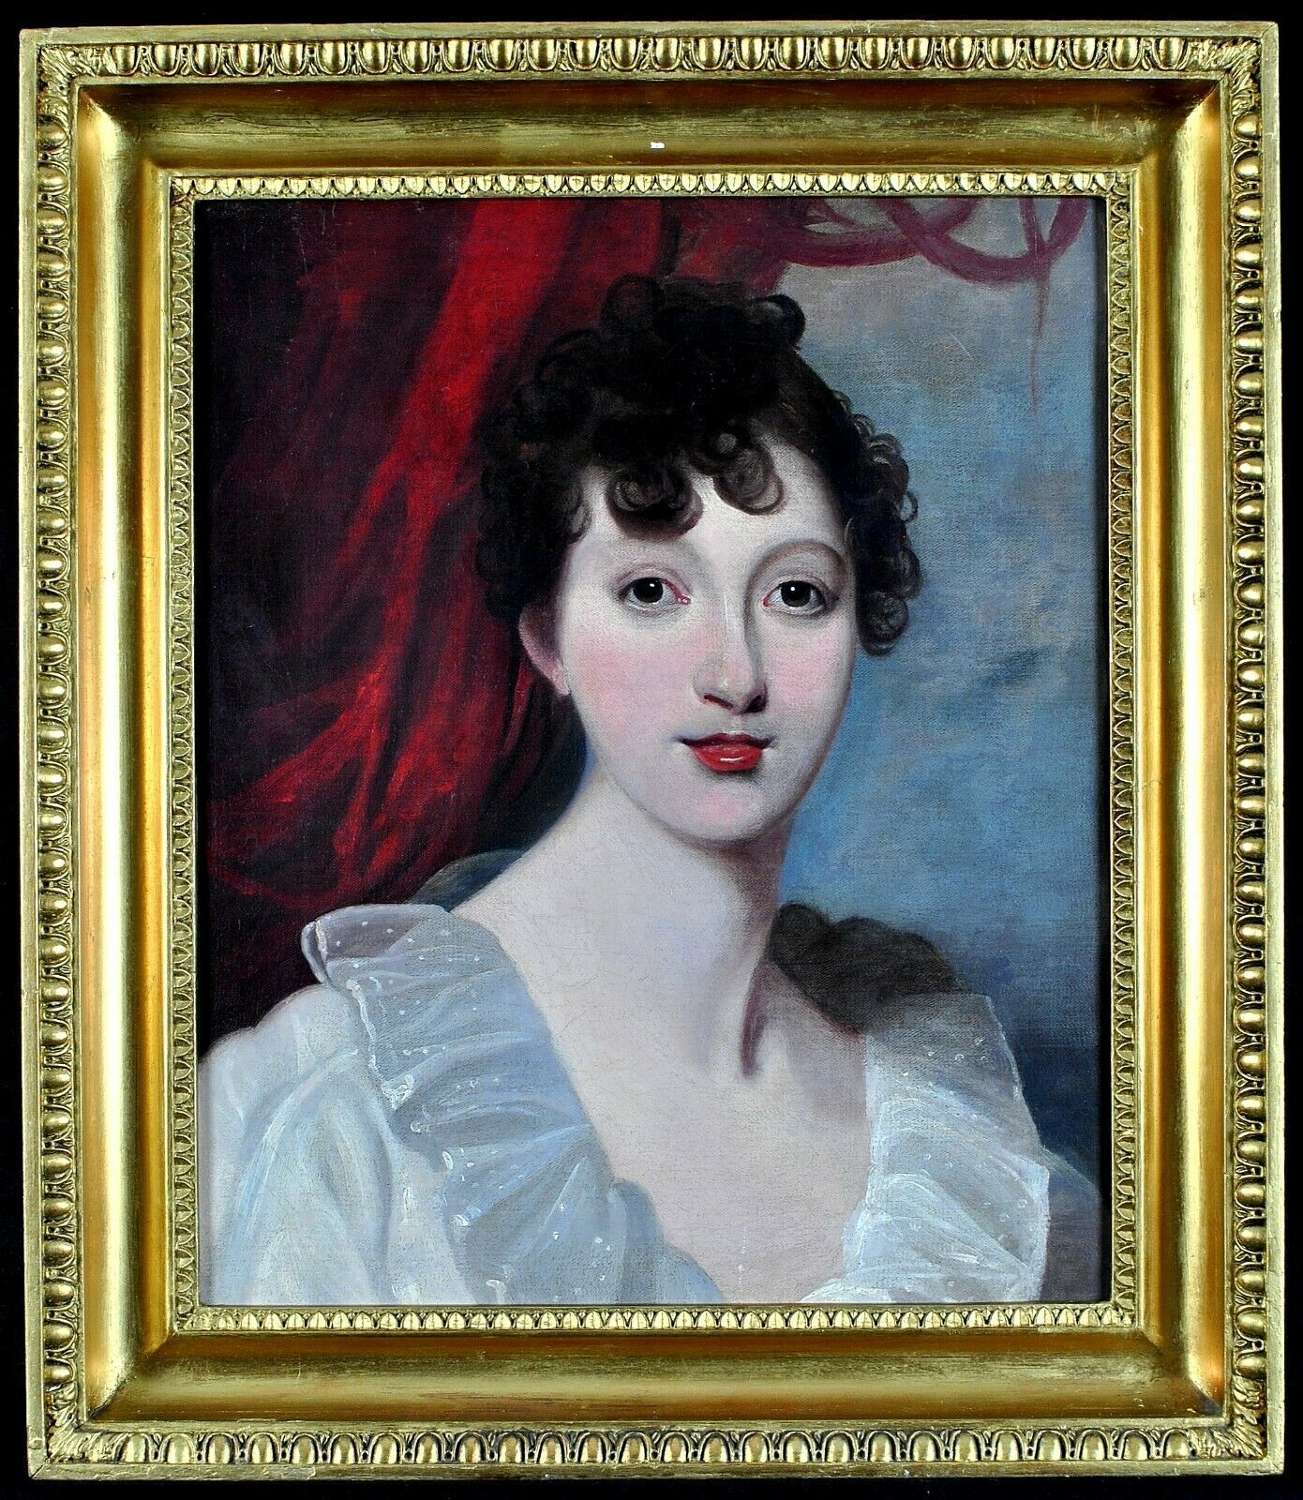 C. 1820 PORTRAIT OF A LADY CIRCLE OF SIR THOMAS LAWRENCE RA